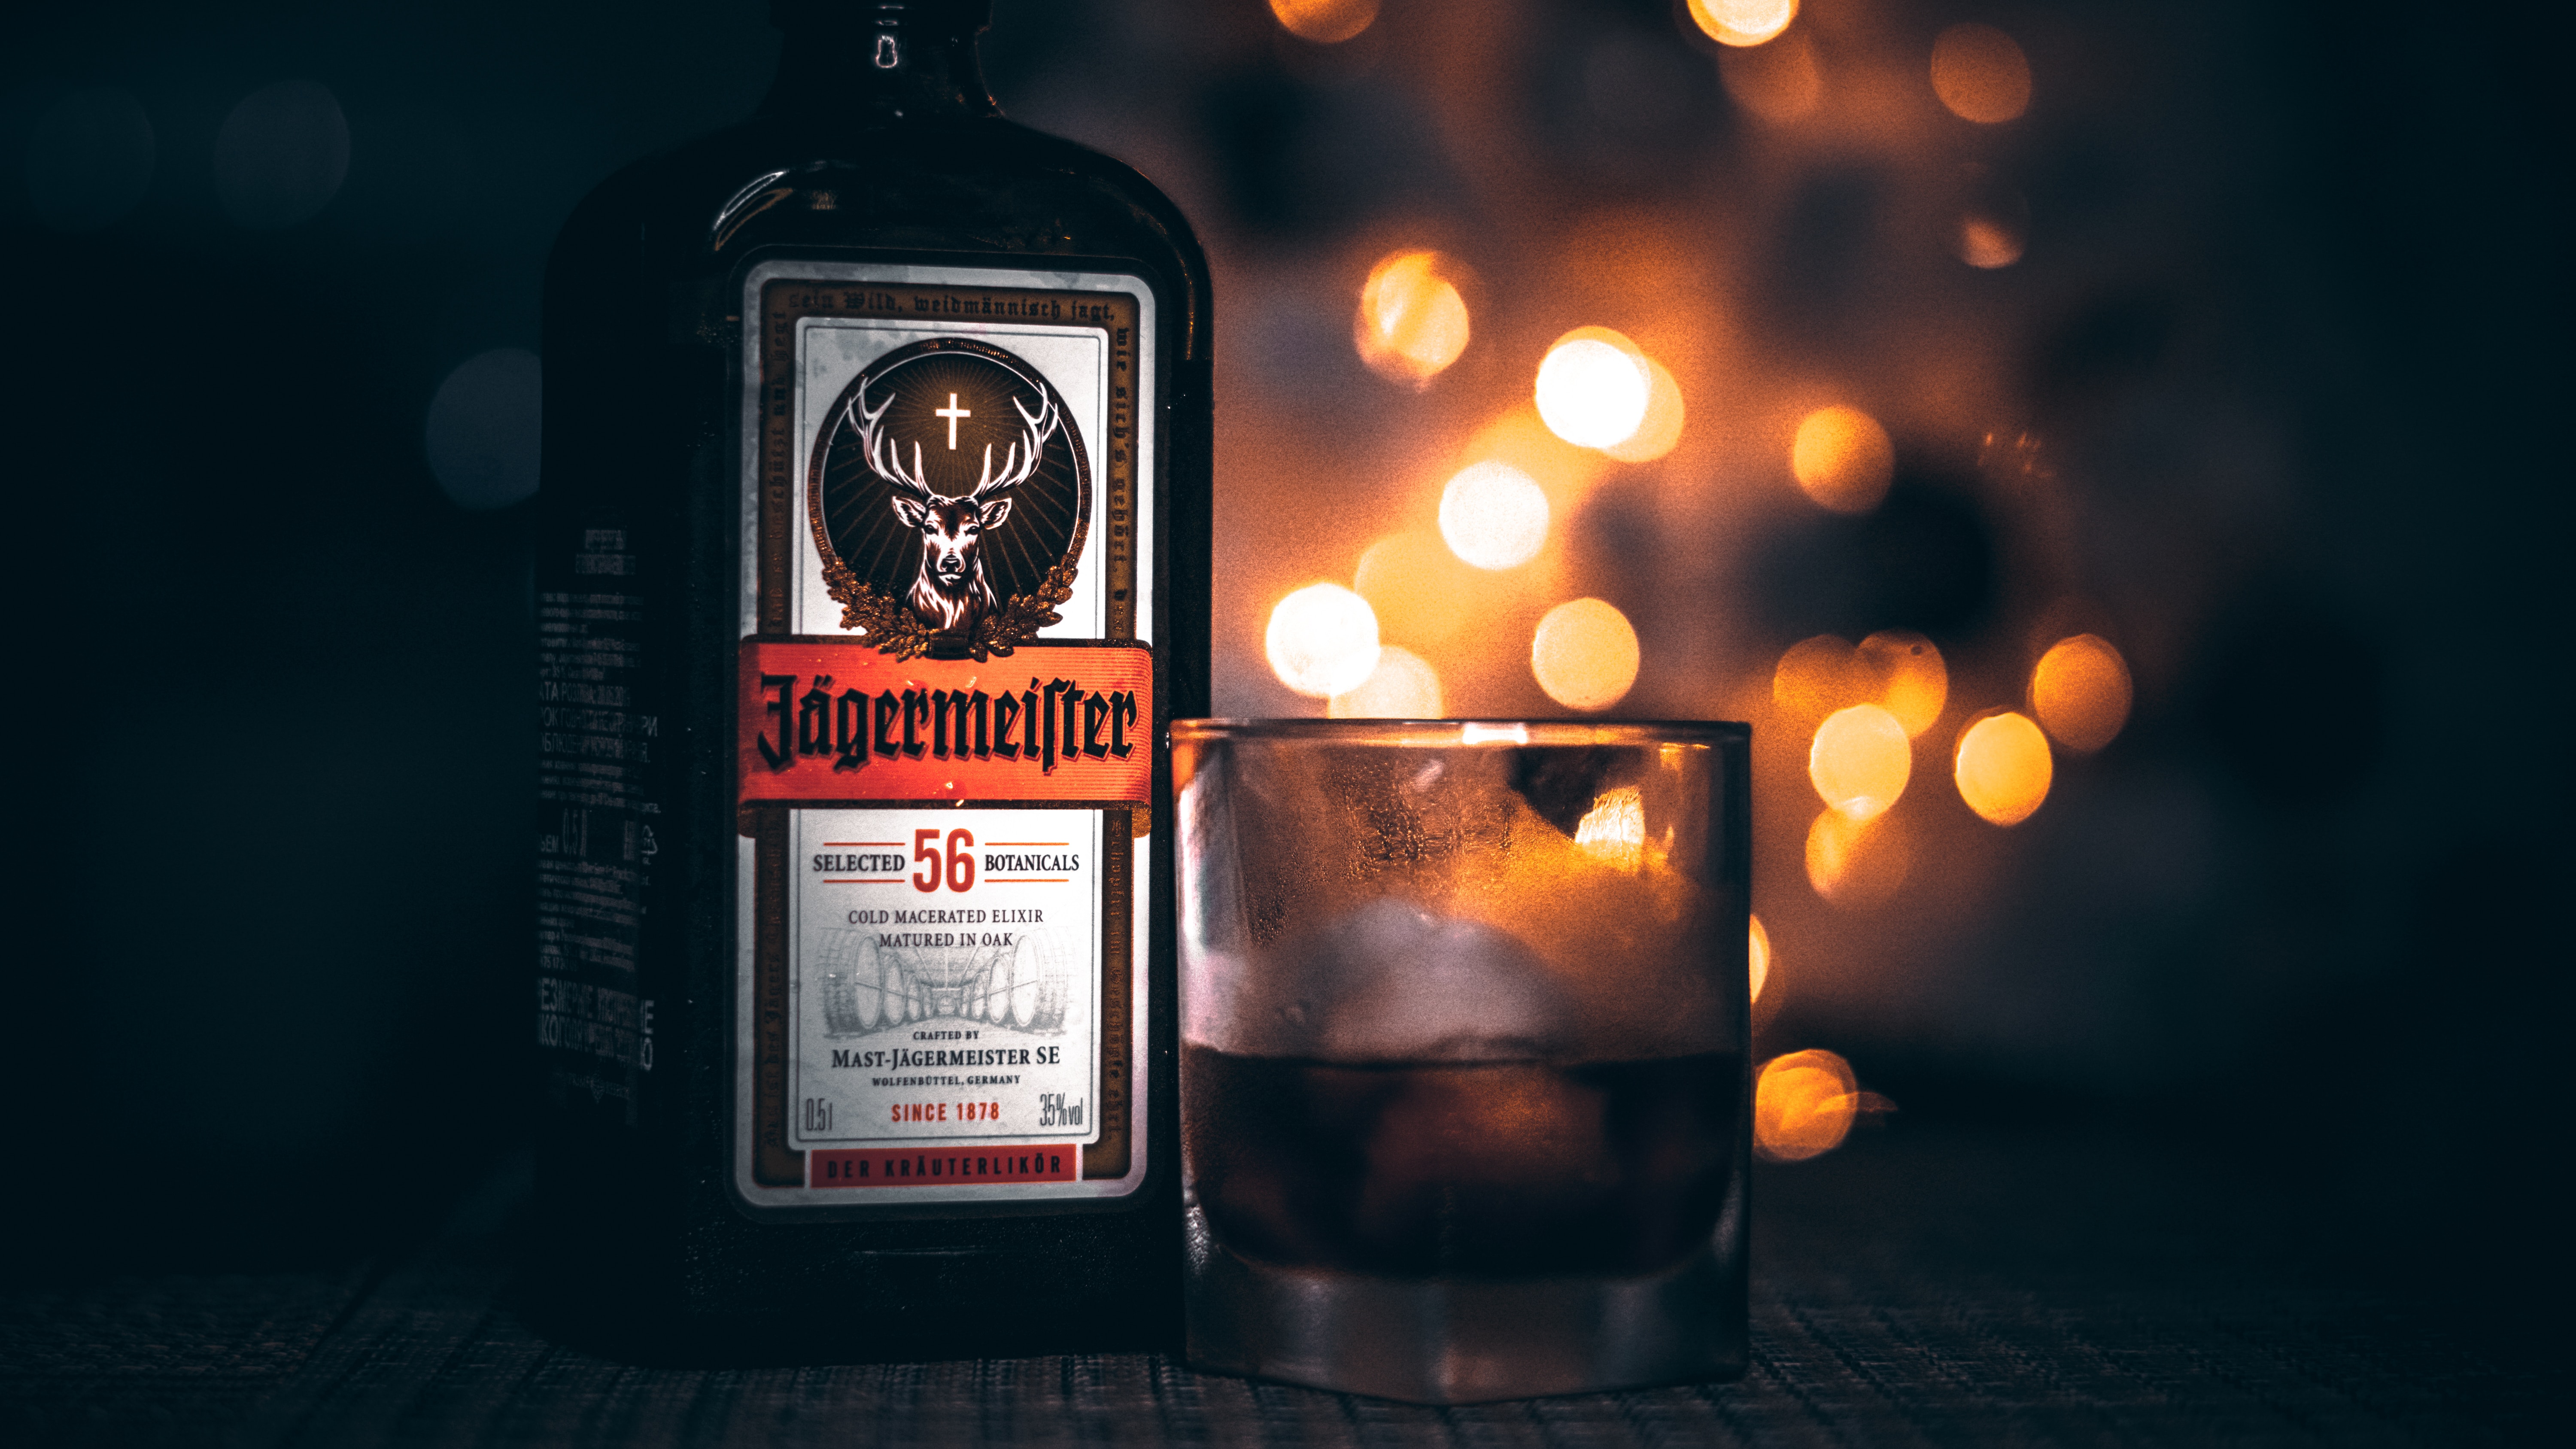 The Jagermeister story